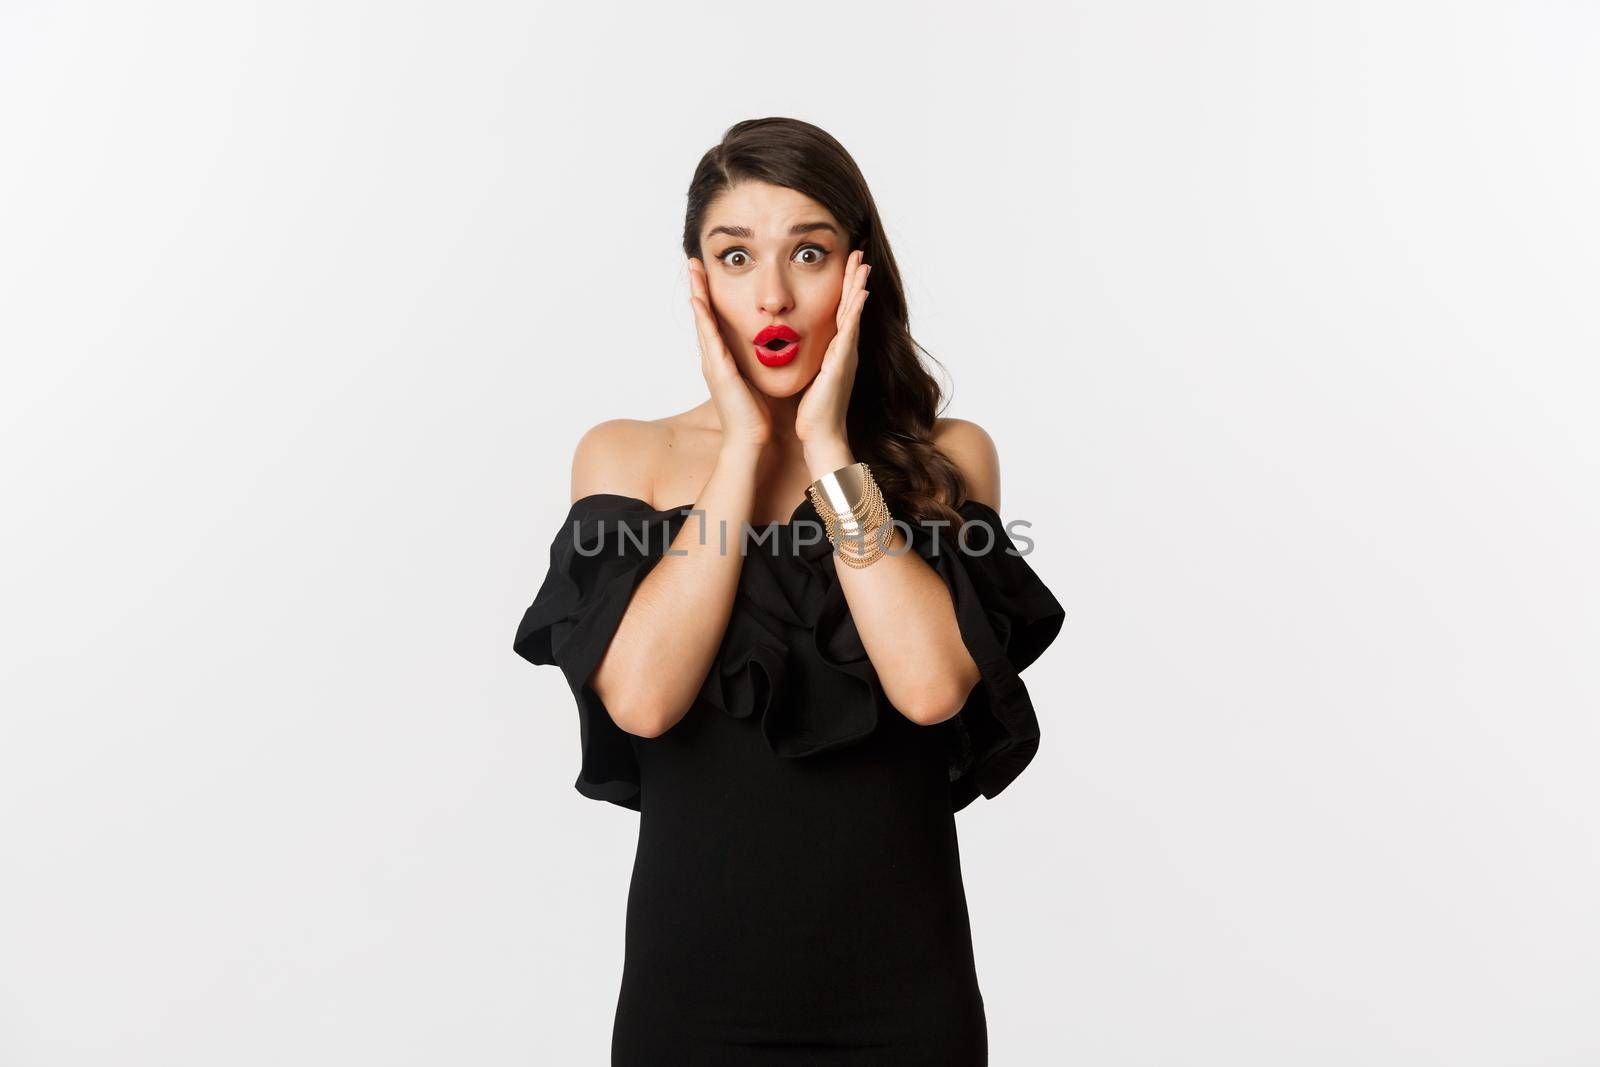 Beauty and fashion concept. Attractive woman in glamour black dress, jewelry and makeup, looking surprised and excited, standing over white background.